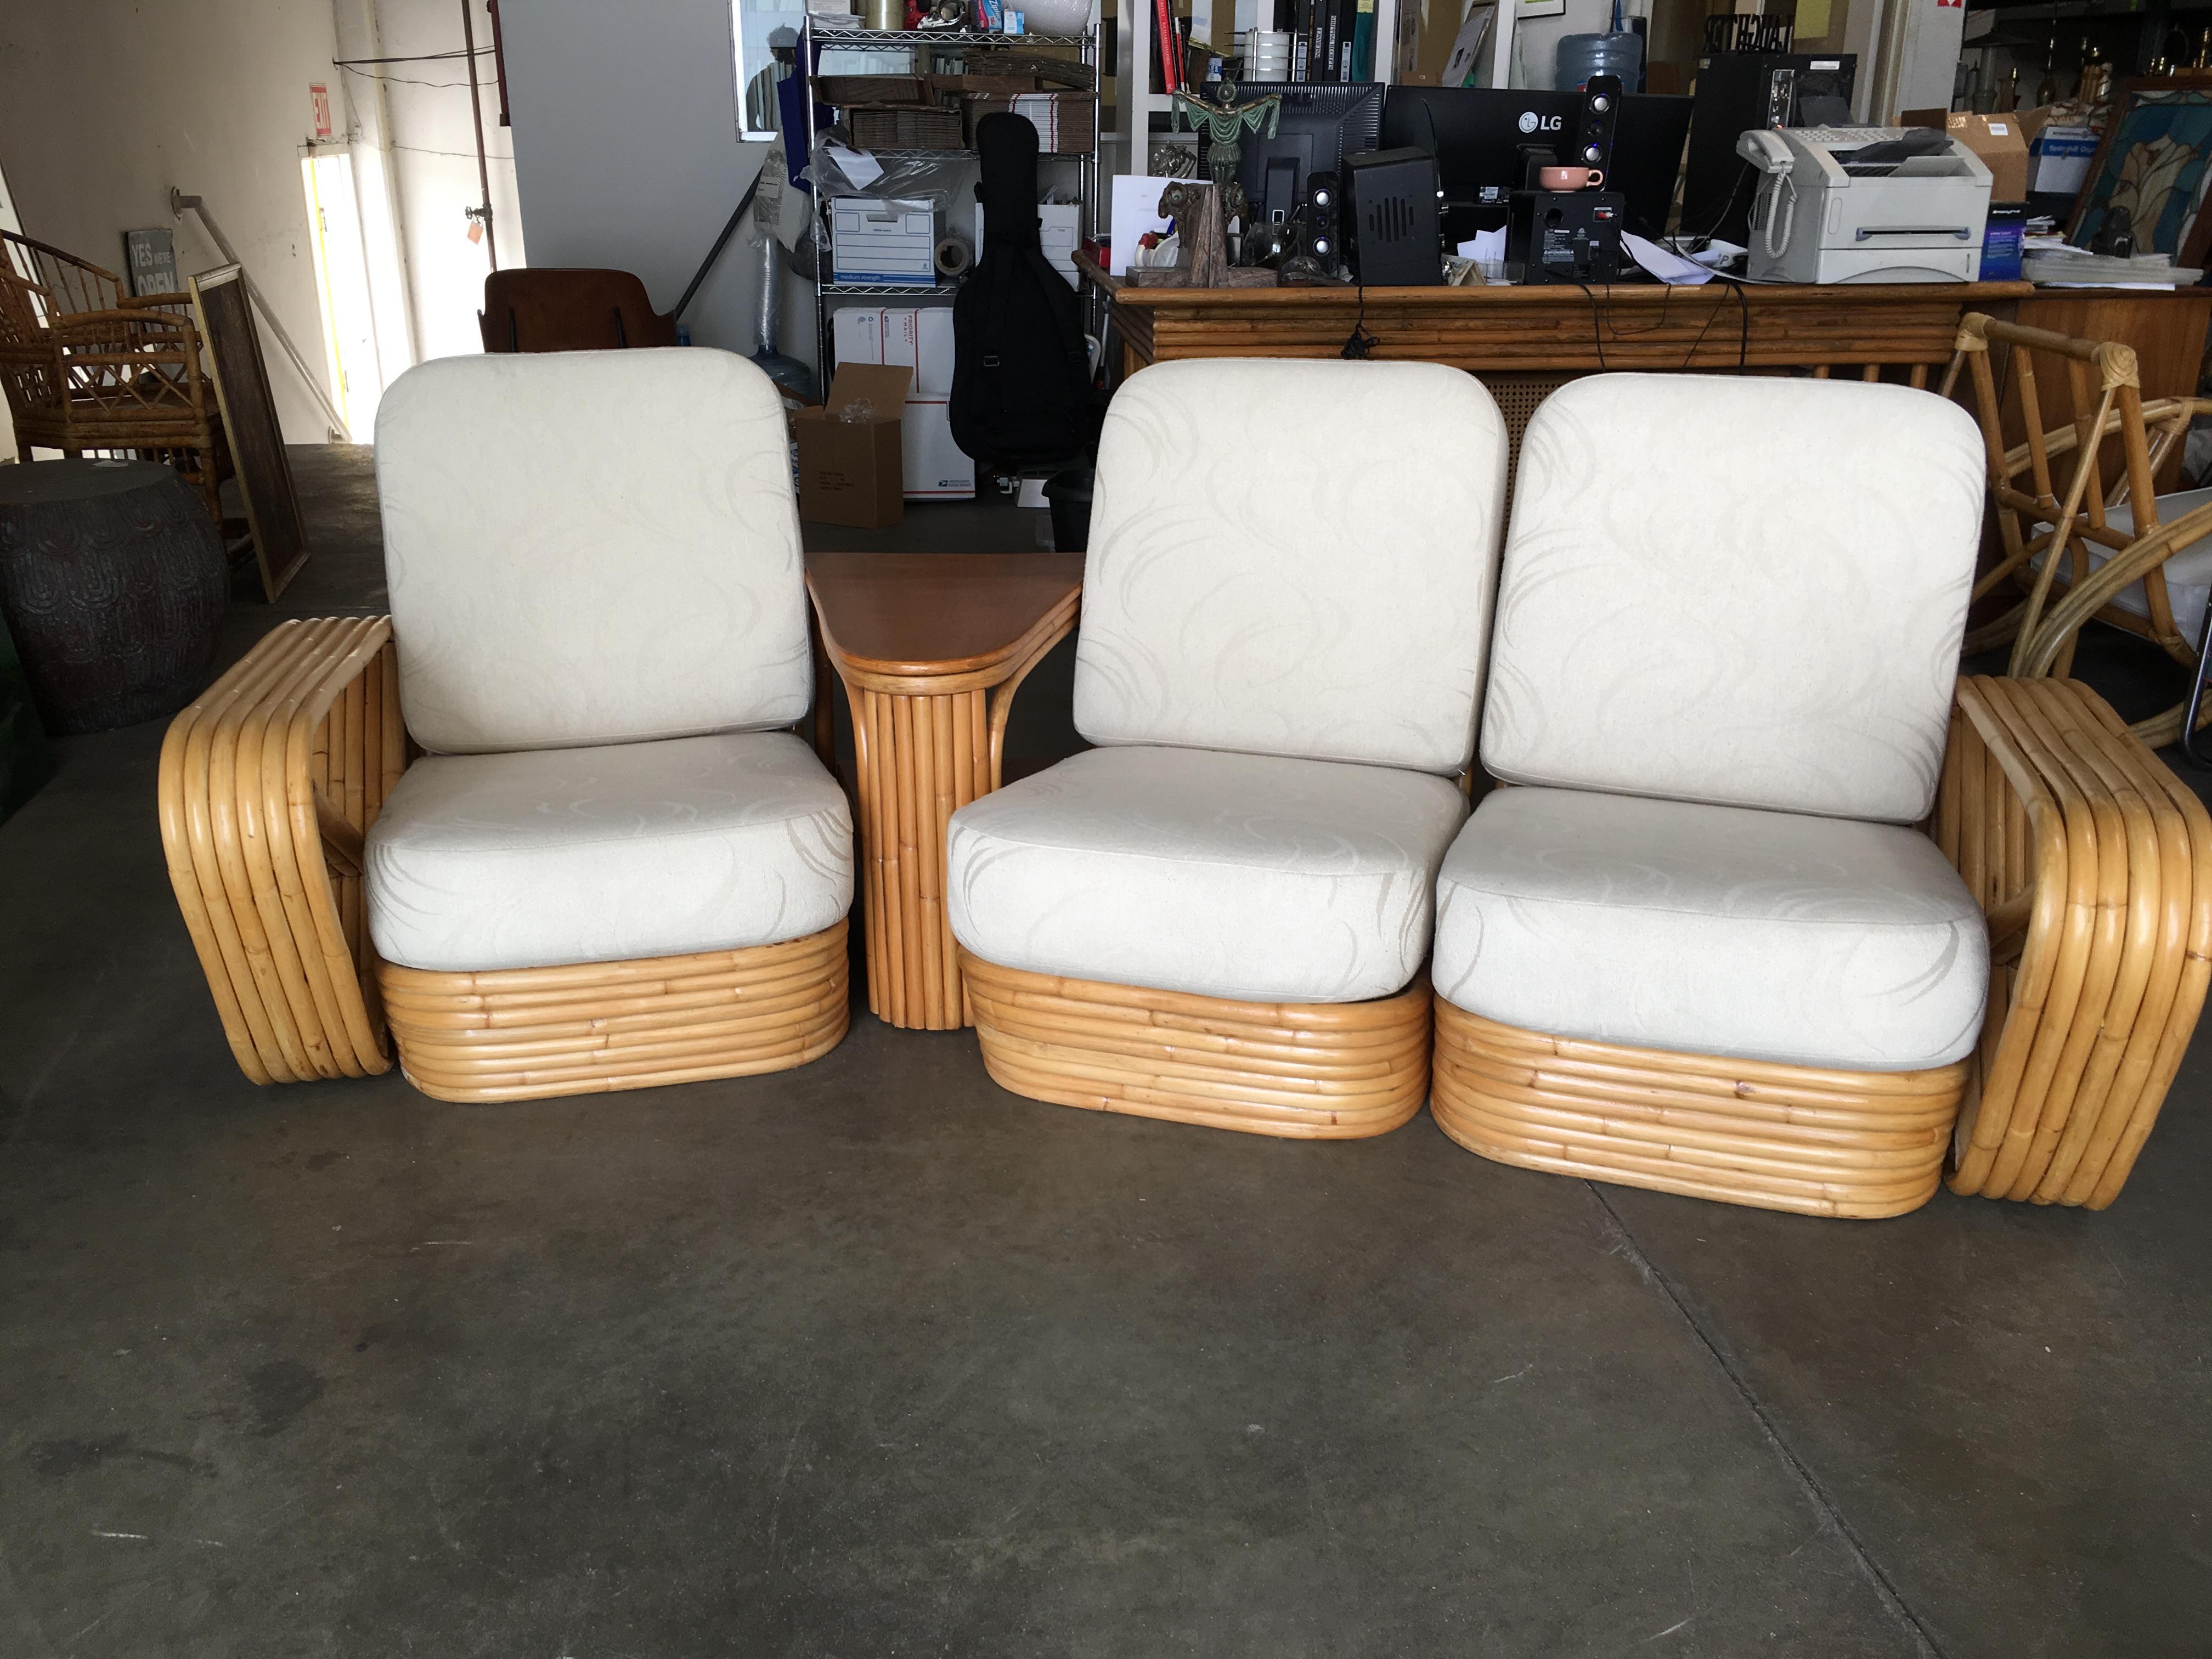 Rare Square Pretzel rattan 3 seater sectional sofa with Paul Frankl inspired design featuring 6 strand rattan arms and Stacked pole base. Comes with two tier rattan side table with can be configured in several arrangements.

Sofa: 32in. H x 80in. W